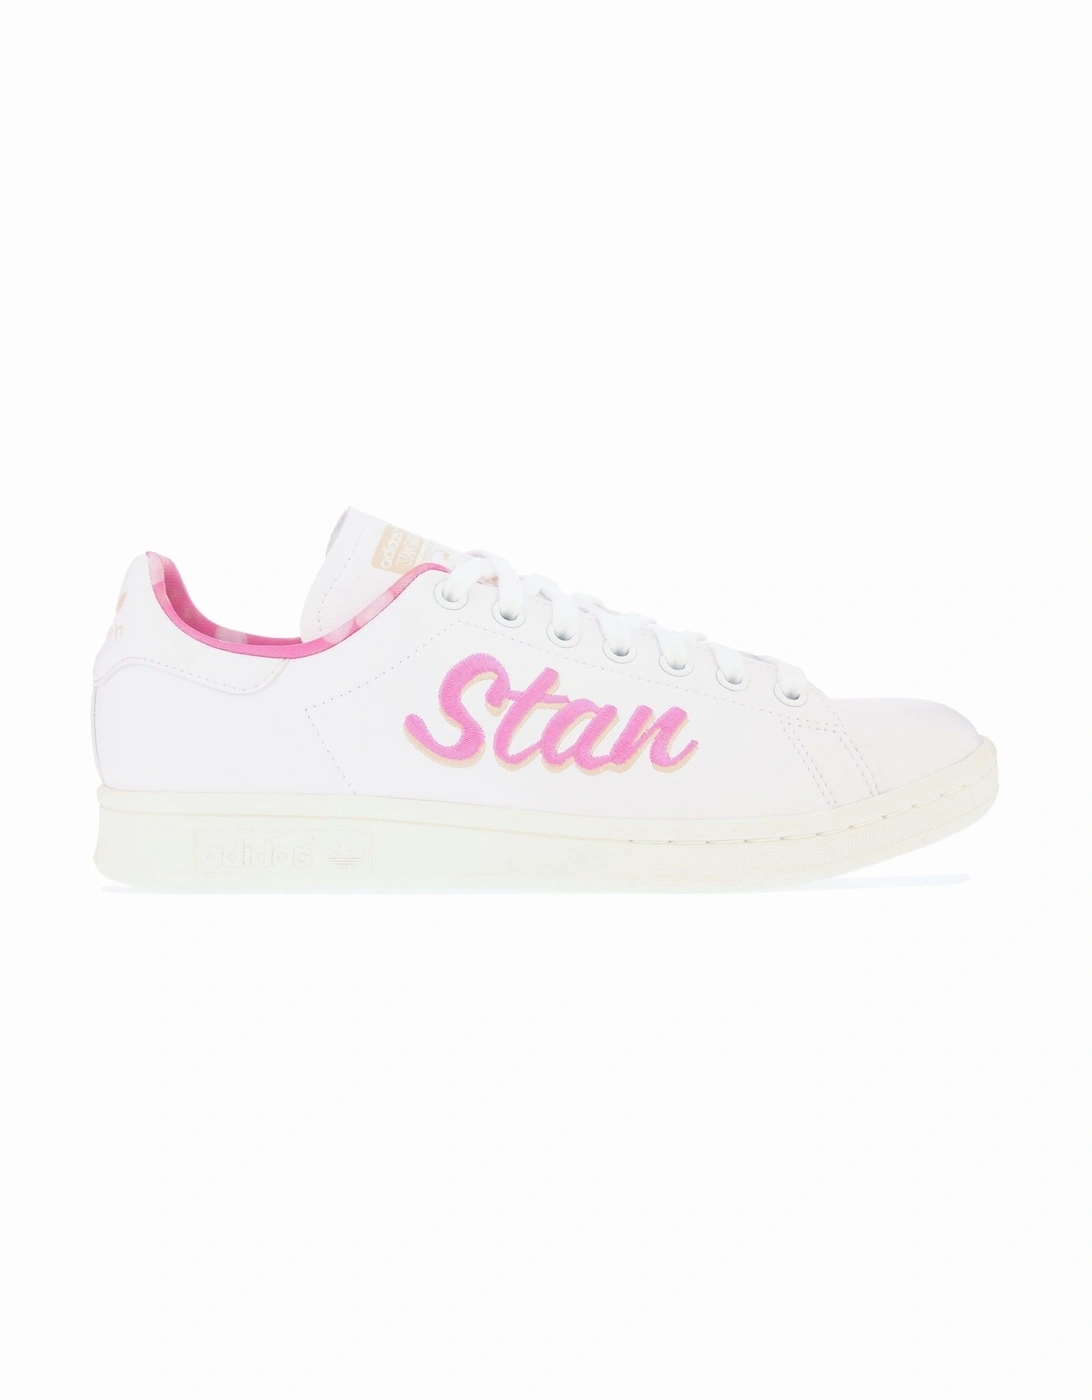 Women's Stan Smith Trainers - Womens Stan Smith Trainers - White/Multi-Colour/Multi/White Pink- [Size: UK 7.5 only]